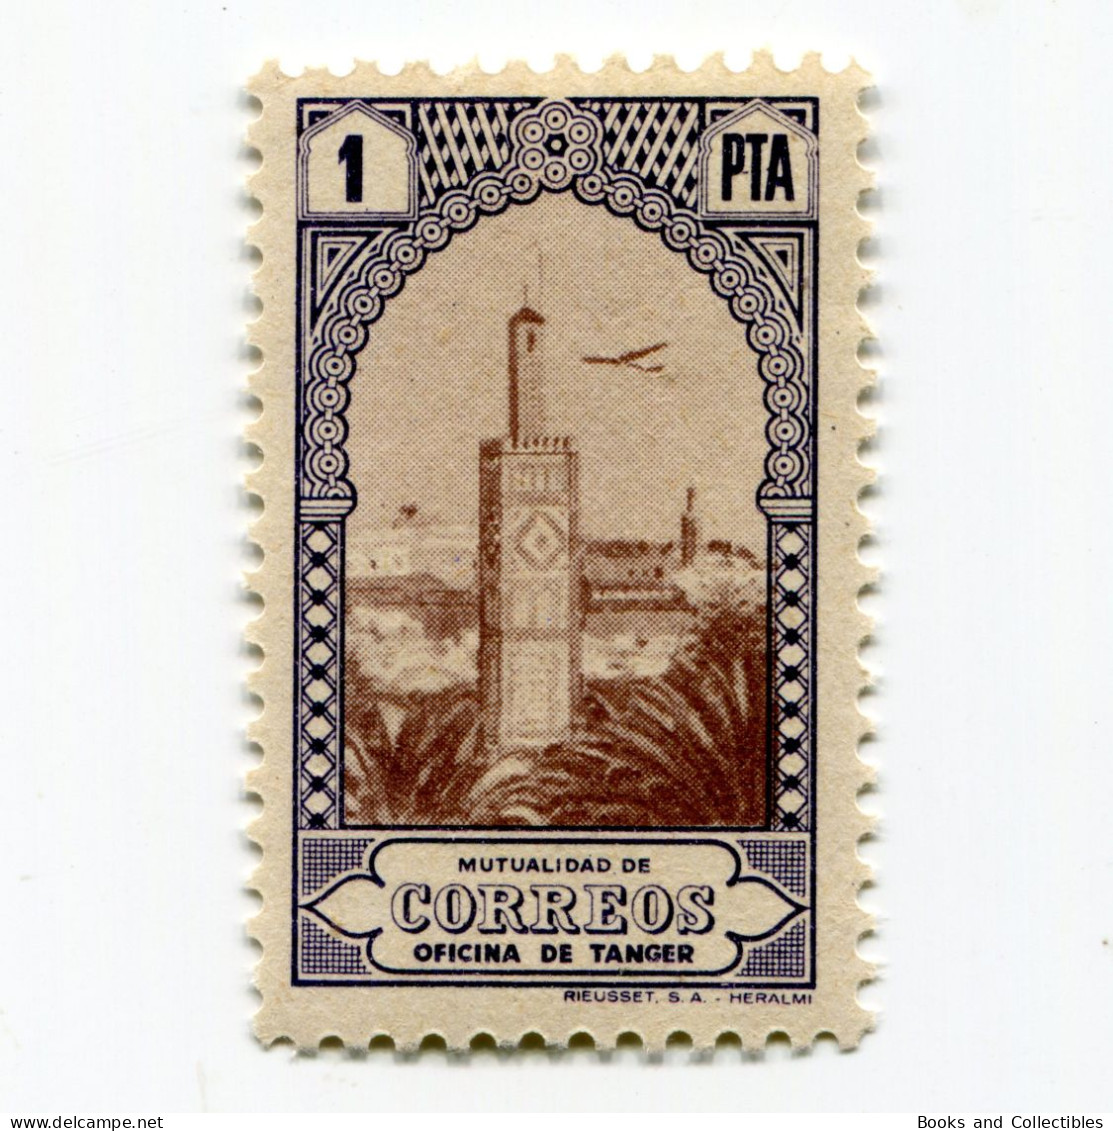 [FBL ● A-01] SPANISH TANGIER - 1946 - Beneficent Stamps - 1 Pta - Edifil ES-TNG BE32 - Bienfaisance